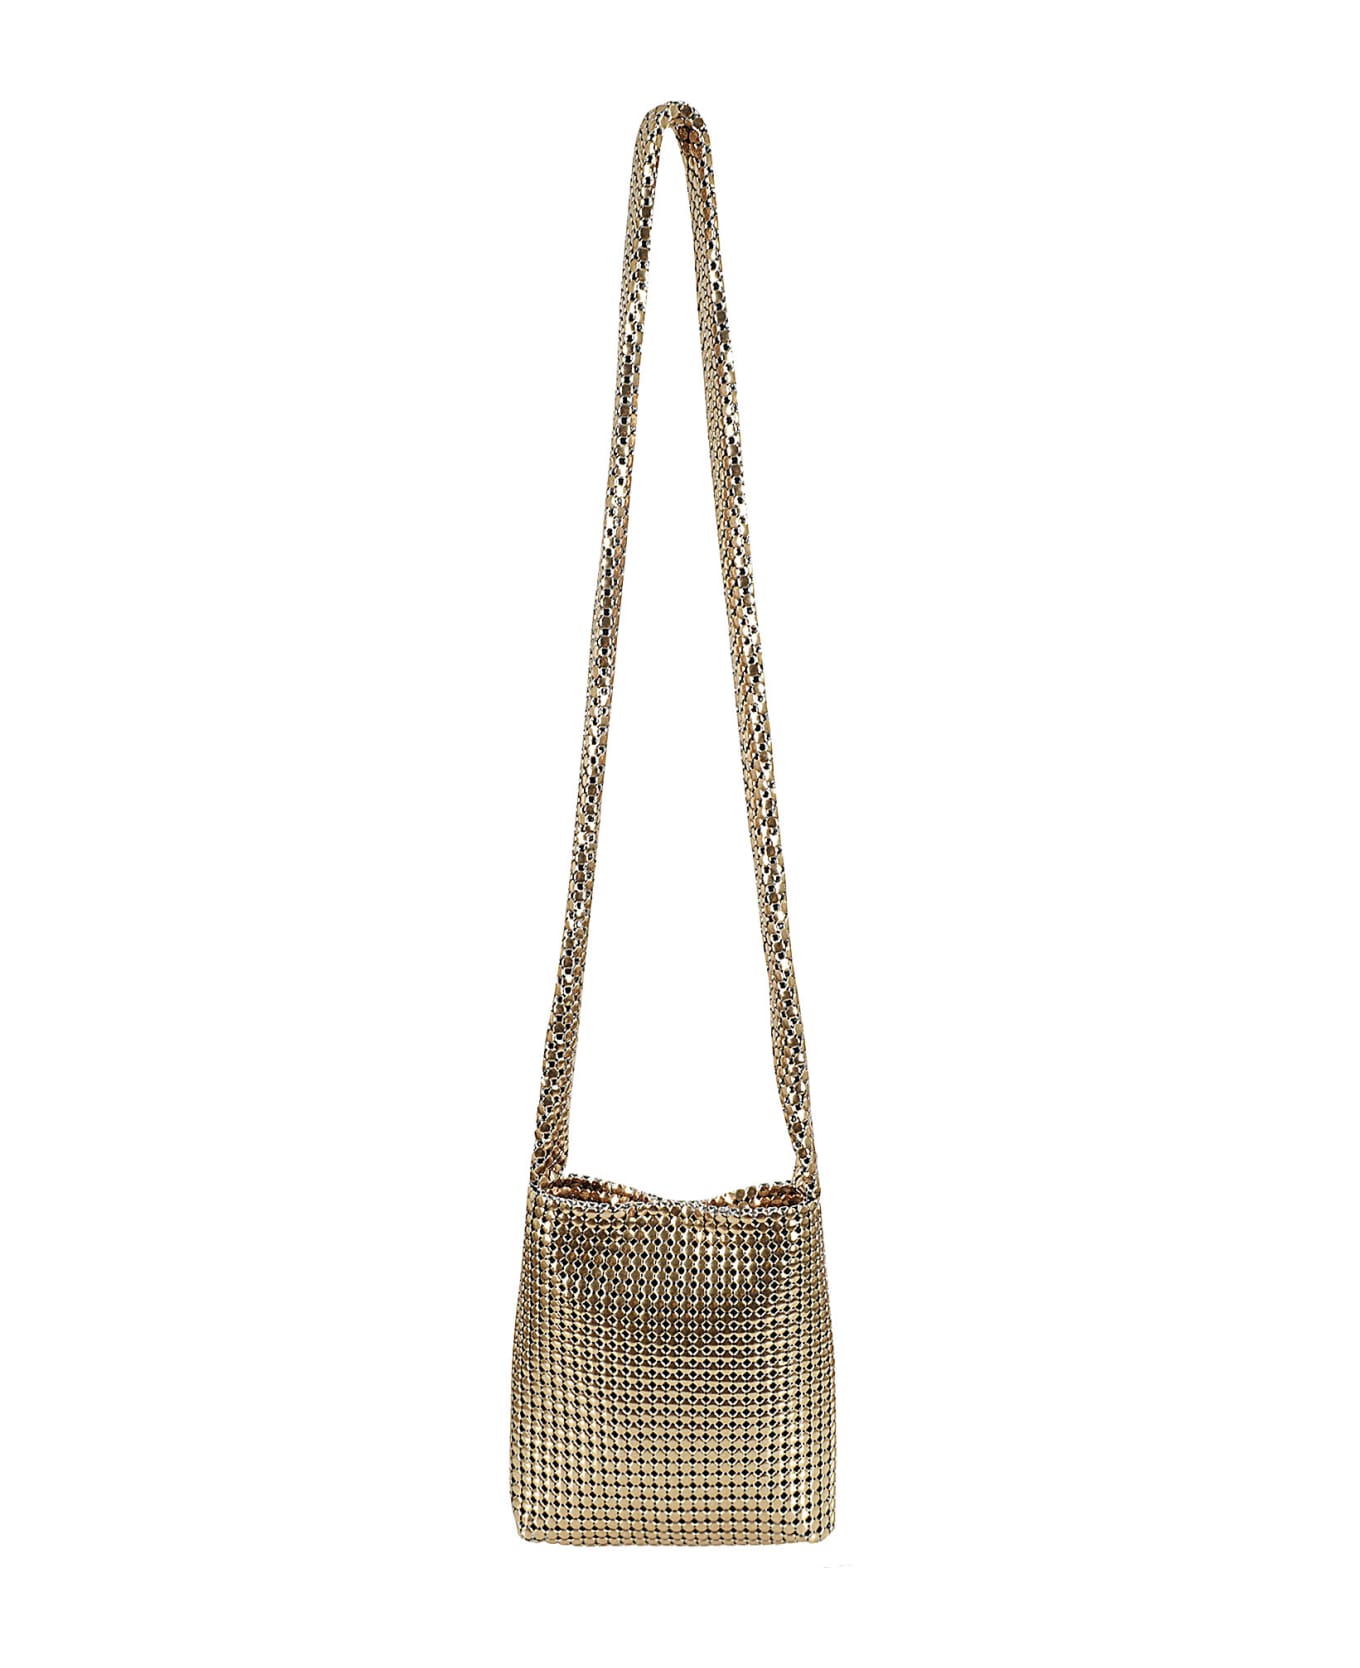 Paco Rabanne Sac Bandouliere - Gold